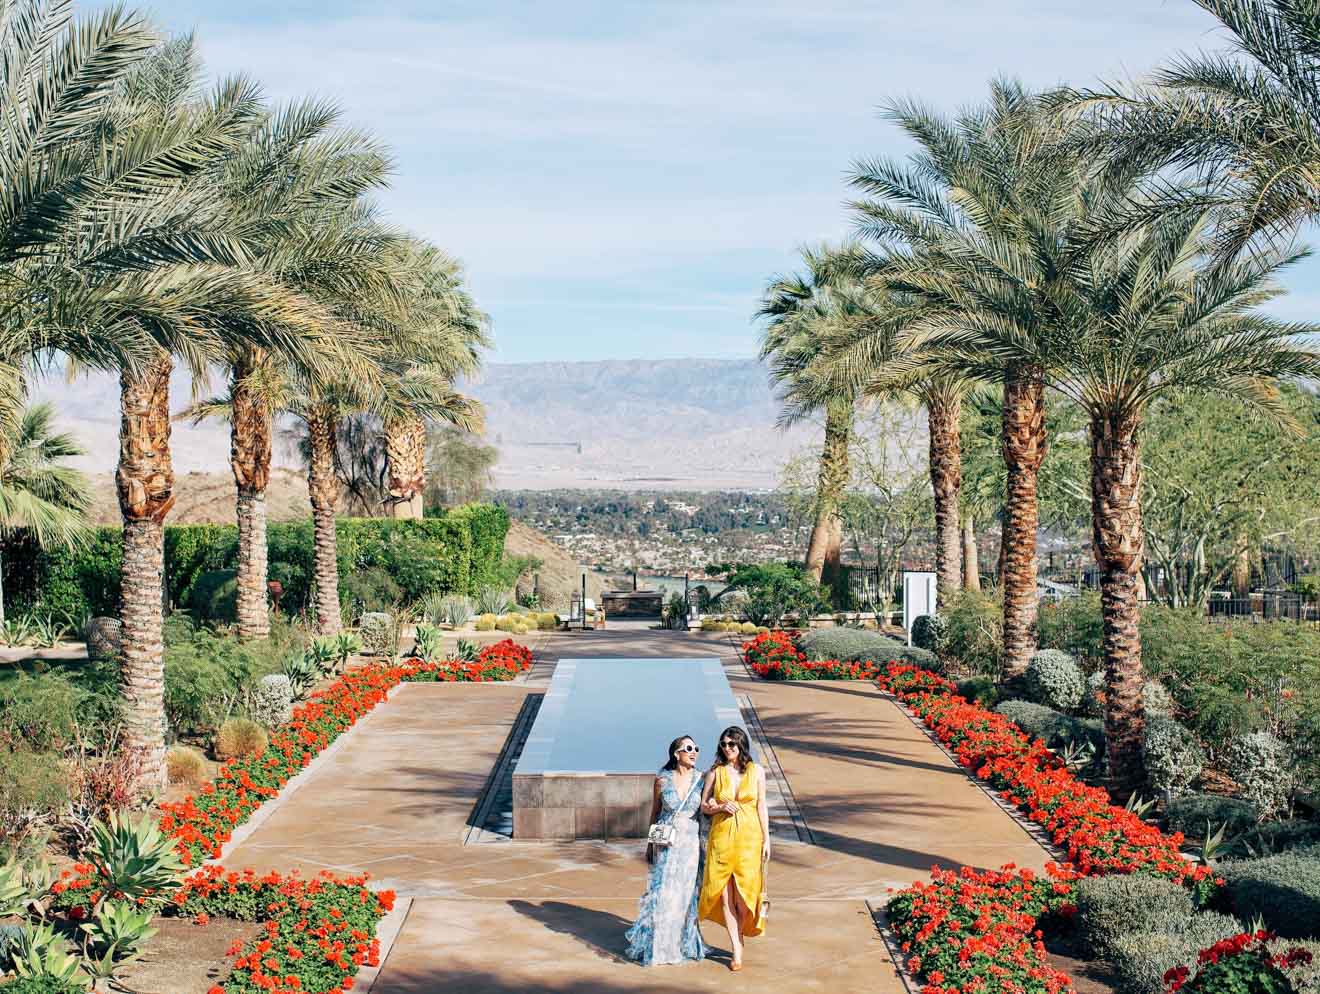 The Ritz-Carlton Rancho Mirage, Laura Lily Fashion Travel and Lifestyle Blog, Best Hotels in Palm Desert | How to Take Good Travel Photos by popular California travel blogger, Laura Lily: image of two women walking through the courtyard at the The Ritz-Carlton, Rancho Mirage, California.